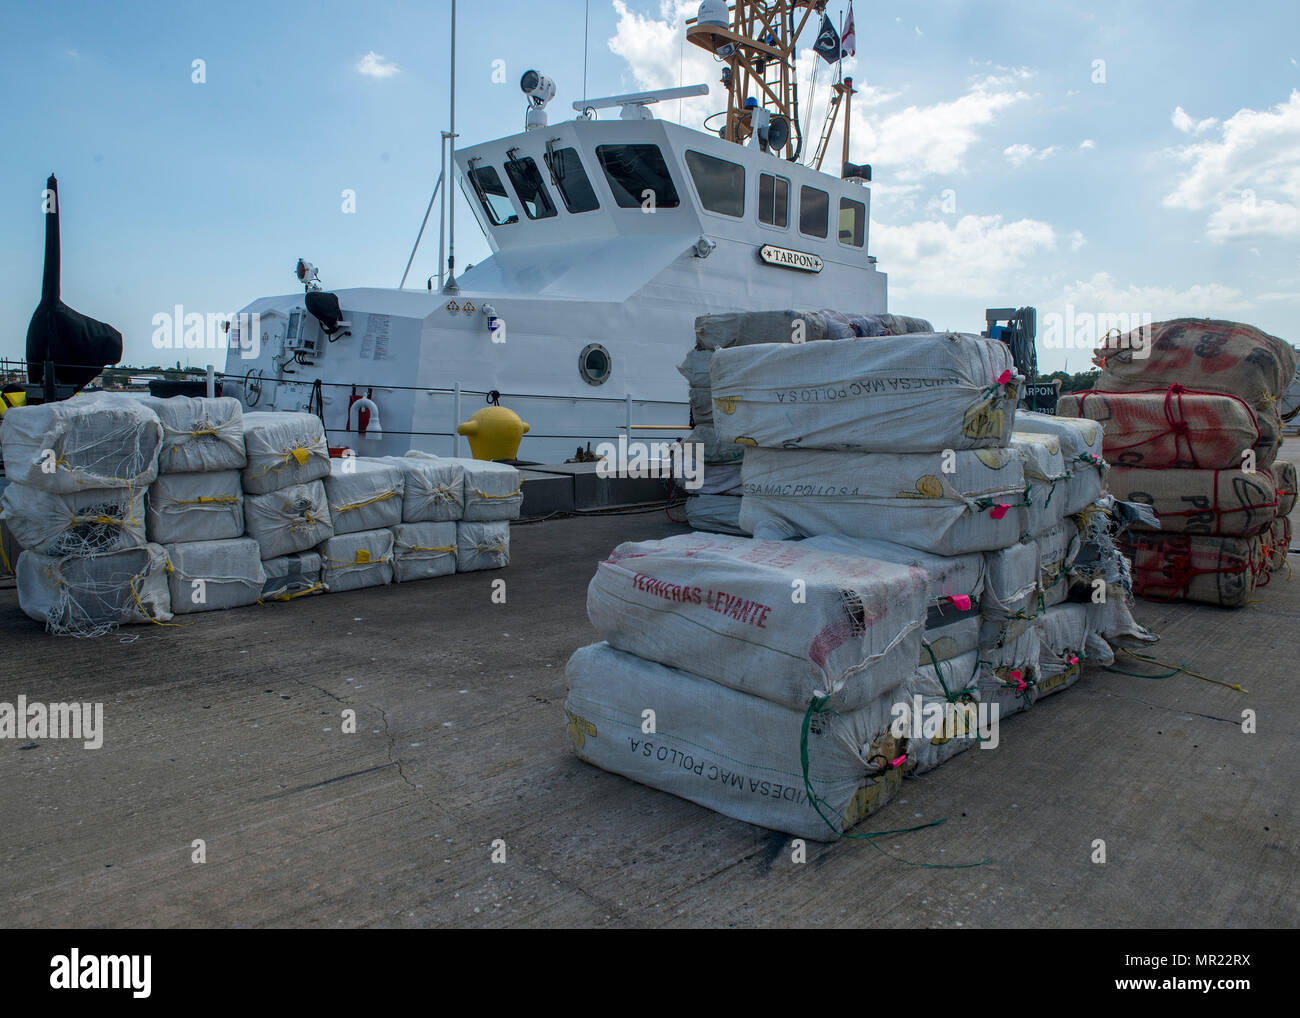 More than 3,825 pounds of cocaine await transfer to federal agents Wednesday, May 3, 2017 at Coast Guard Sector St. Petersburg, Florida. The contraband was interdicted during four separate cases supporting Operation Martillo, a joint interagency and multi-national collaborative effort among 14 Western Hemisphere and European nations to stop the flow of illicit cargo by Transnational Criminal Organizations. (U.S. Coast Guard photo by Petty Officer 1st Class Michael De Nyse) Stock Photo